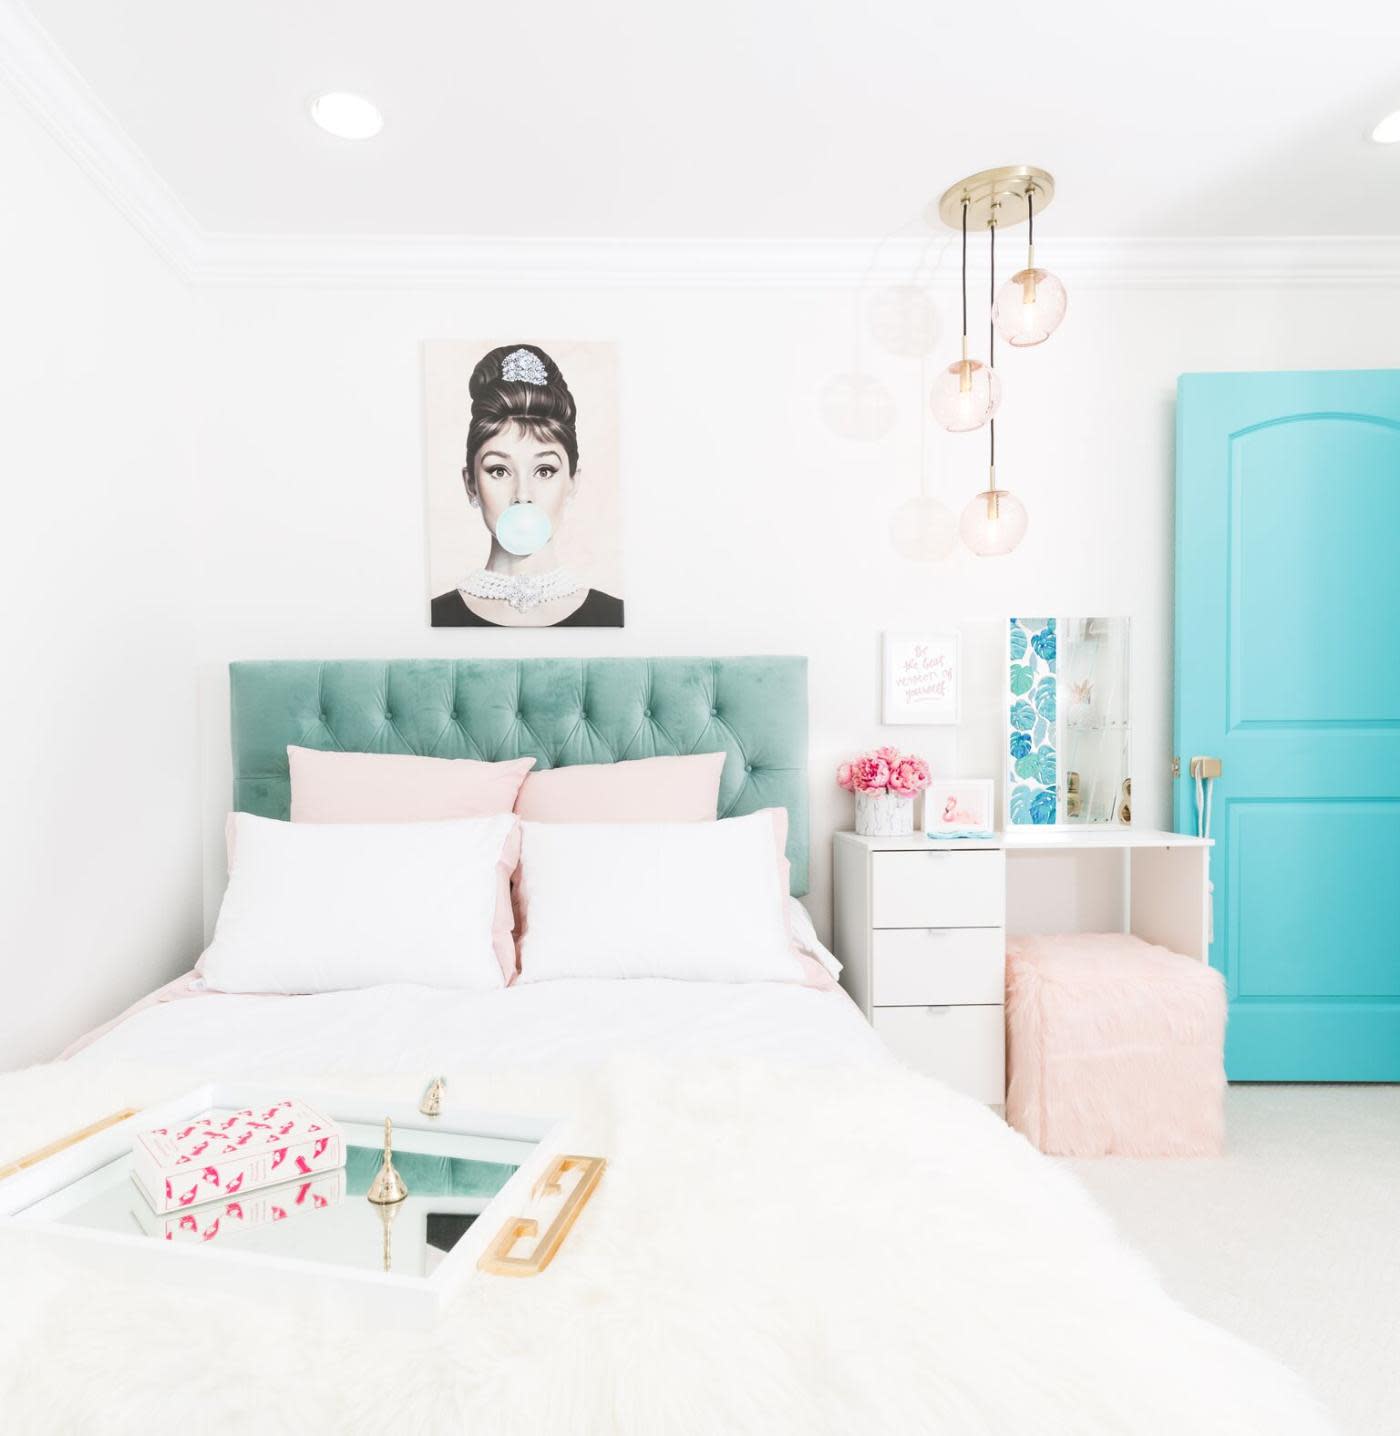 This teen's bedroom re-do was designed to last! Thanks to a classic white color palette, accessories can be changed out over the years to keep the room fresh.